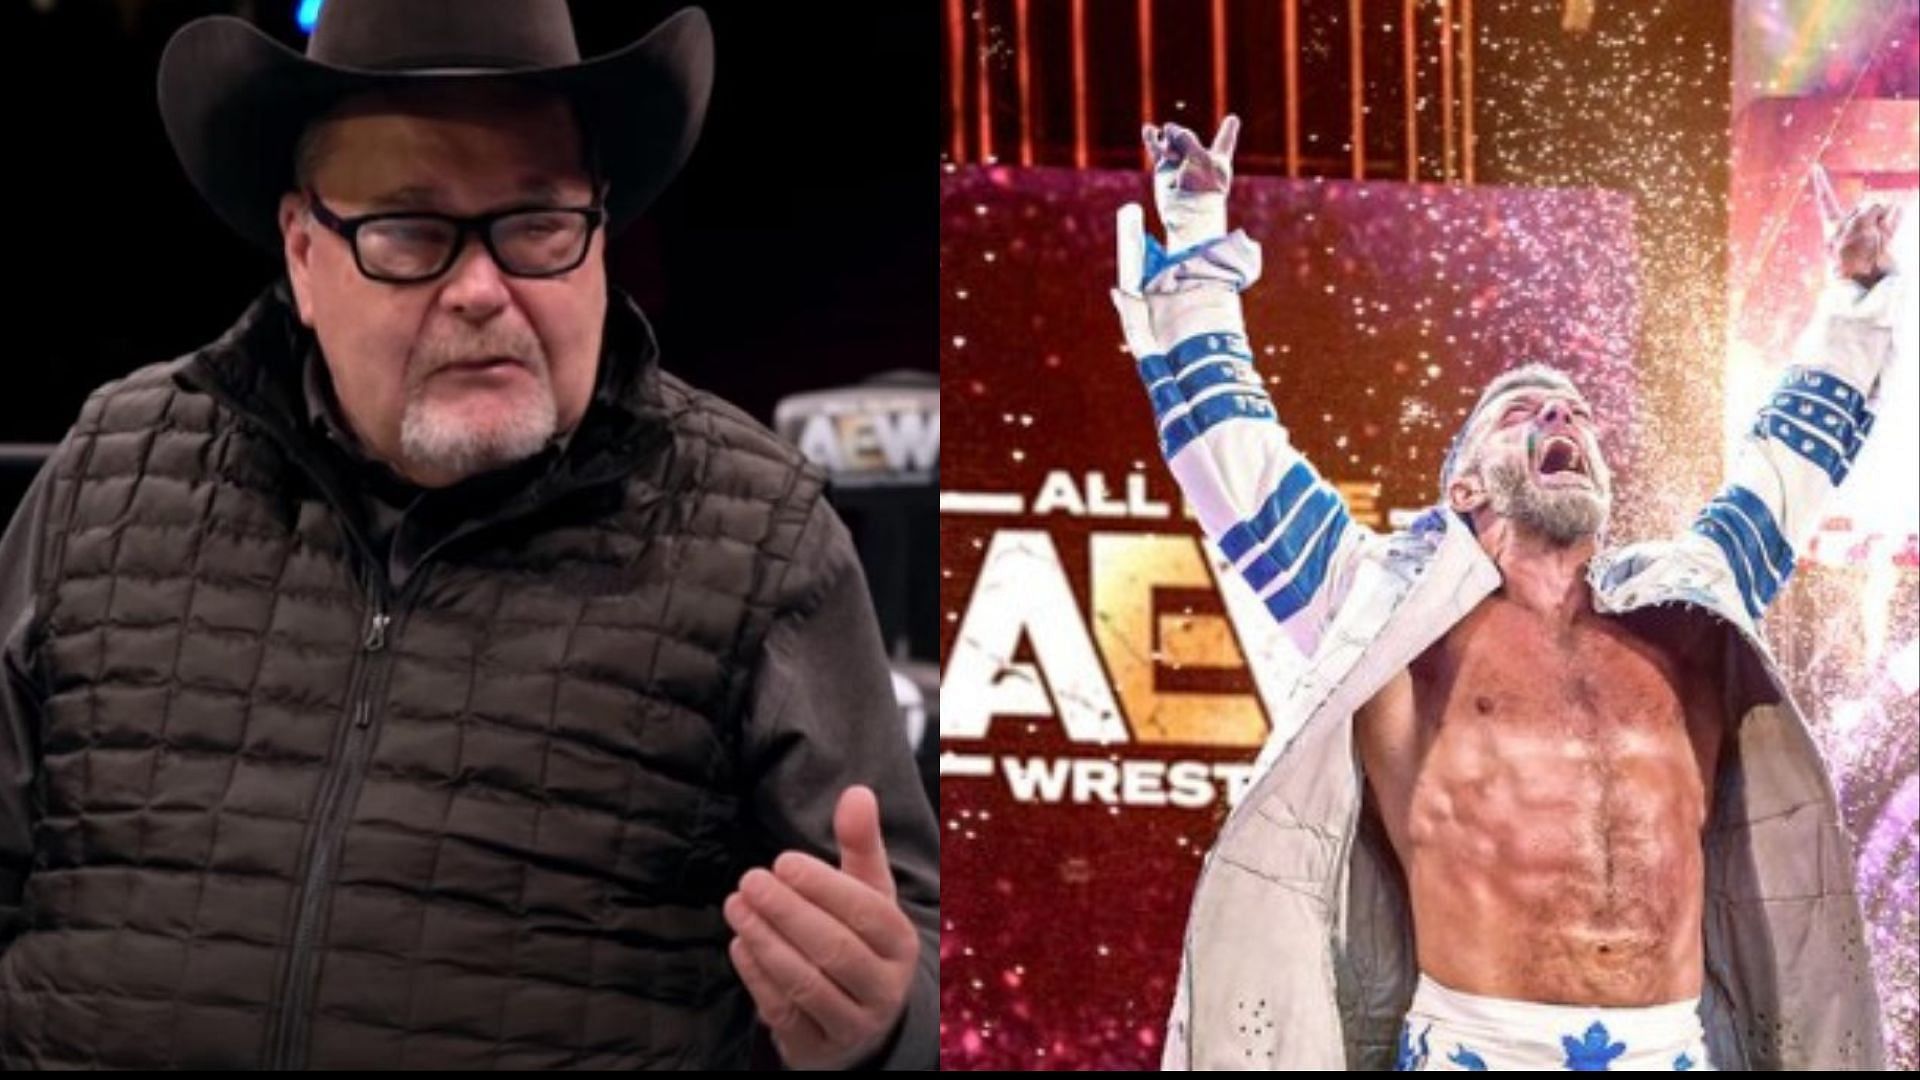 Jim Ross and Edge are both WWE Hall of Famers